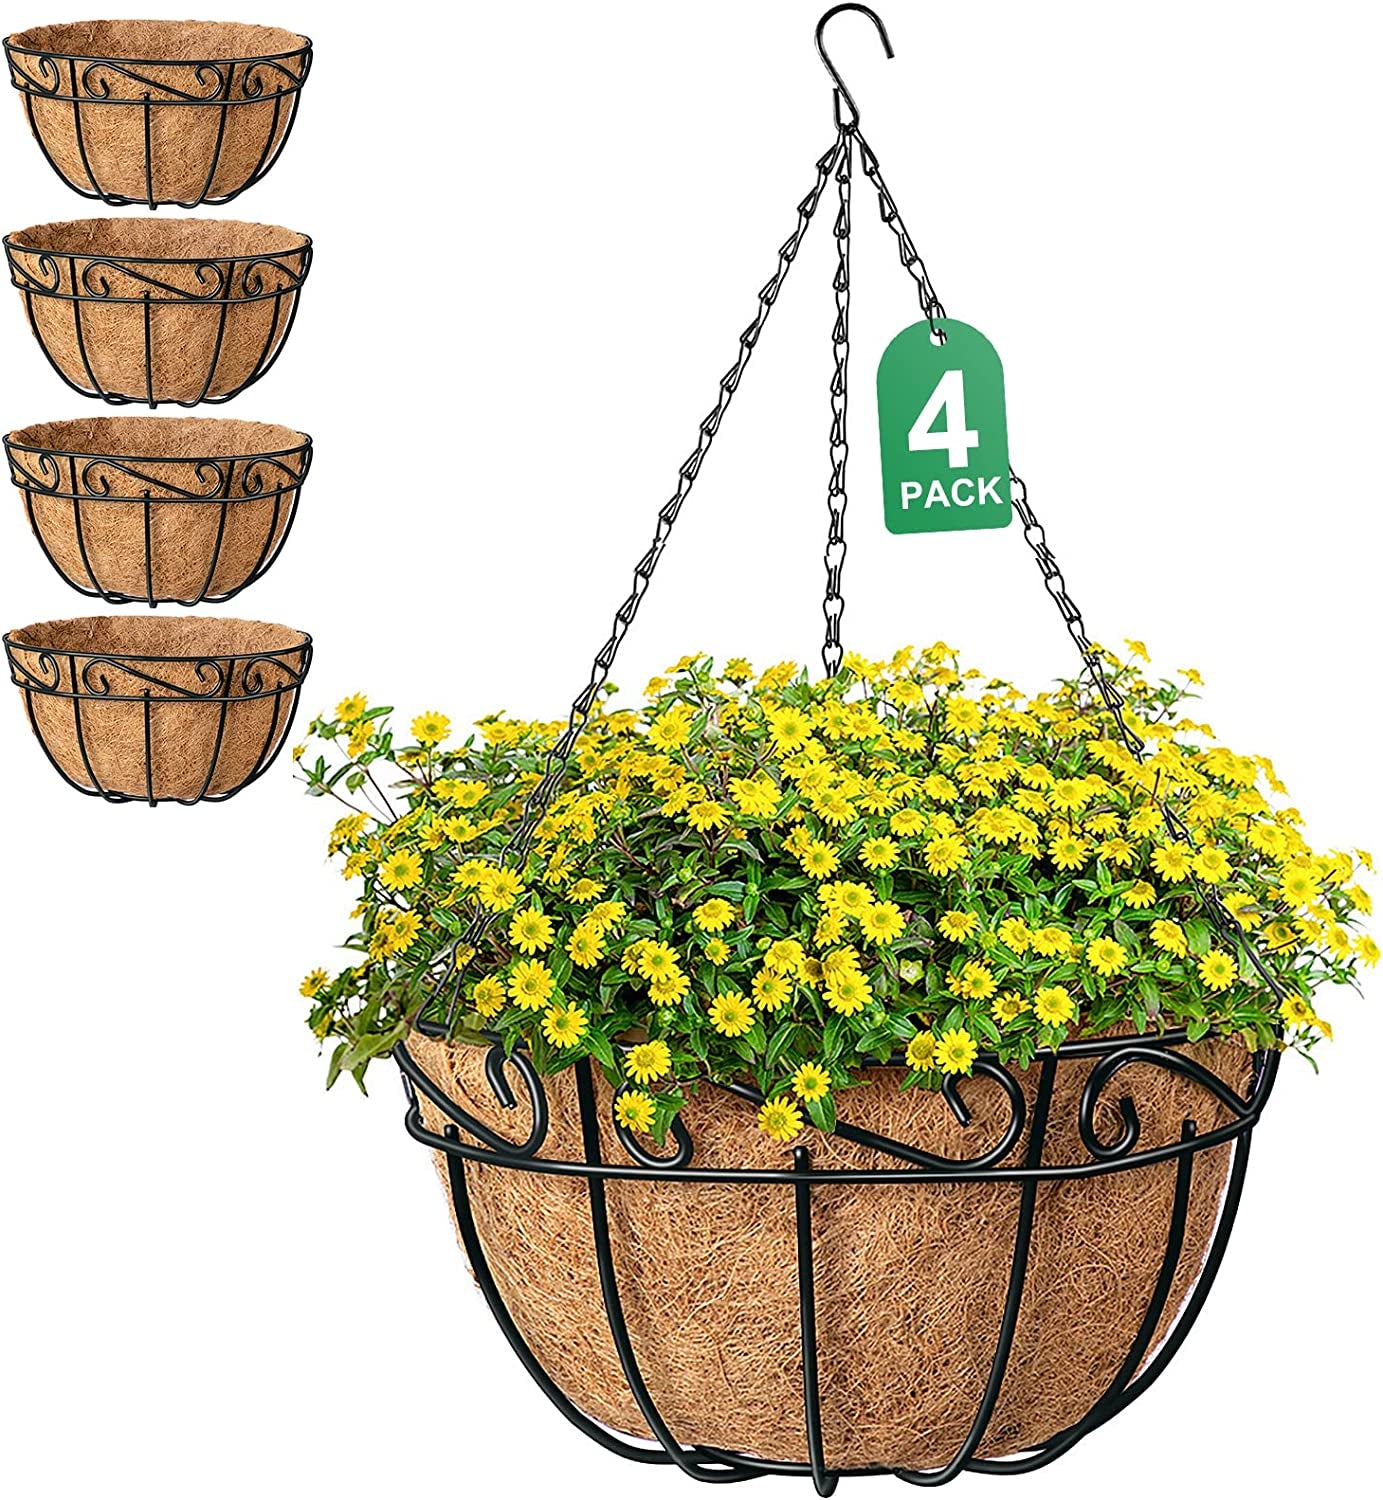 4 Pack 12 Inch Hanging Baskets for Plants Flowers Planter Metal Outdoor Indoor round Wire with Plant Pots Hanger Garden Christmas Decoration Black Basket121